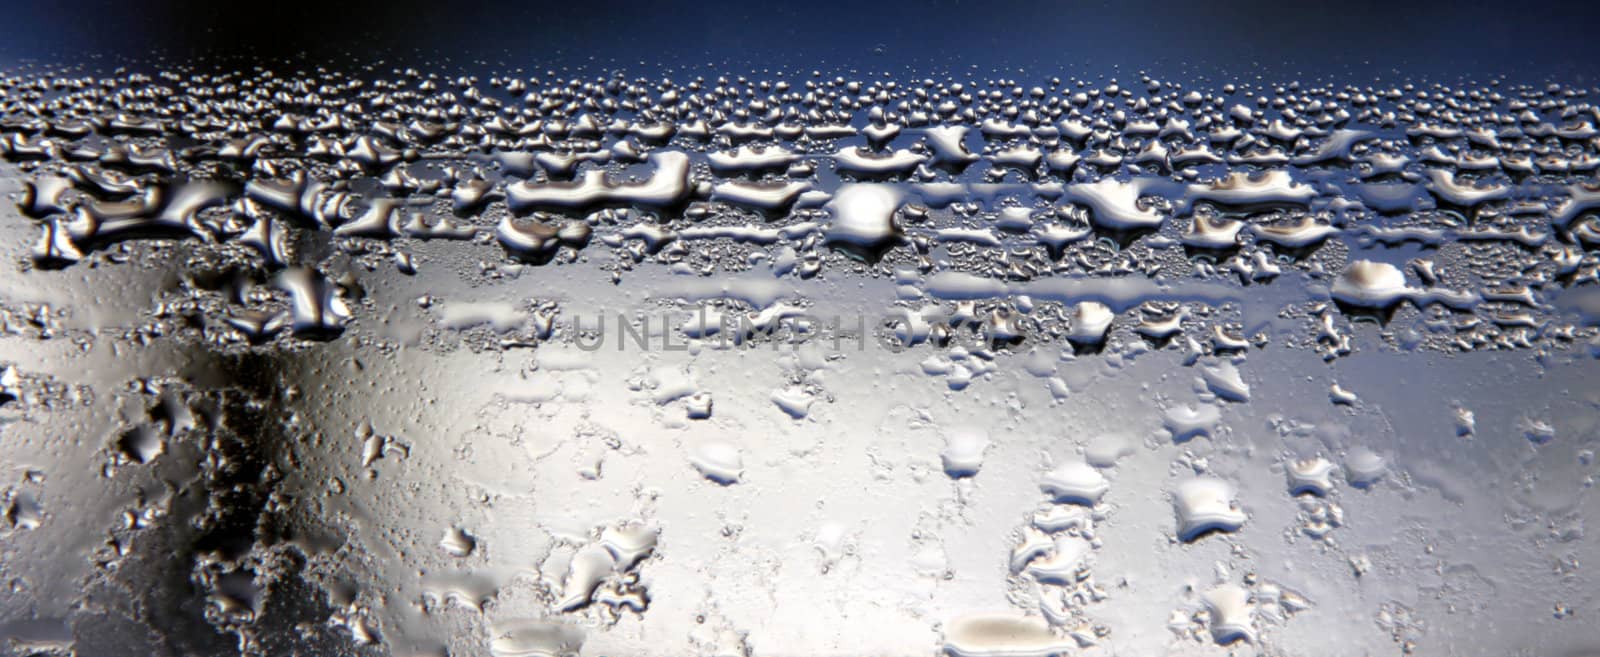 Condensation Close-up
 by ca2hill